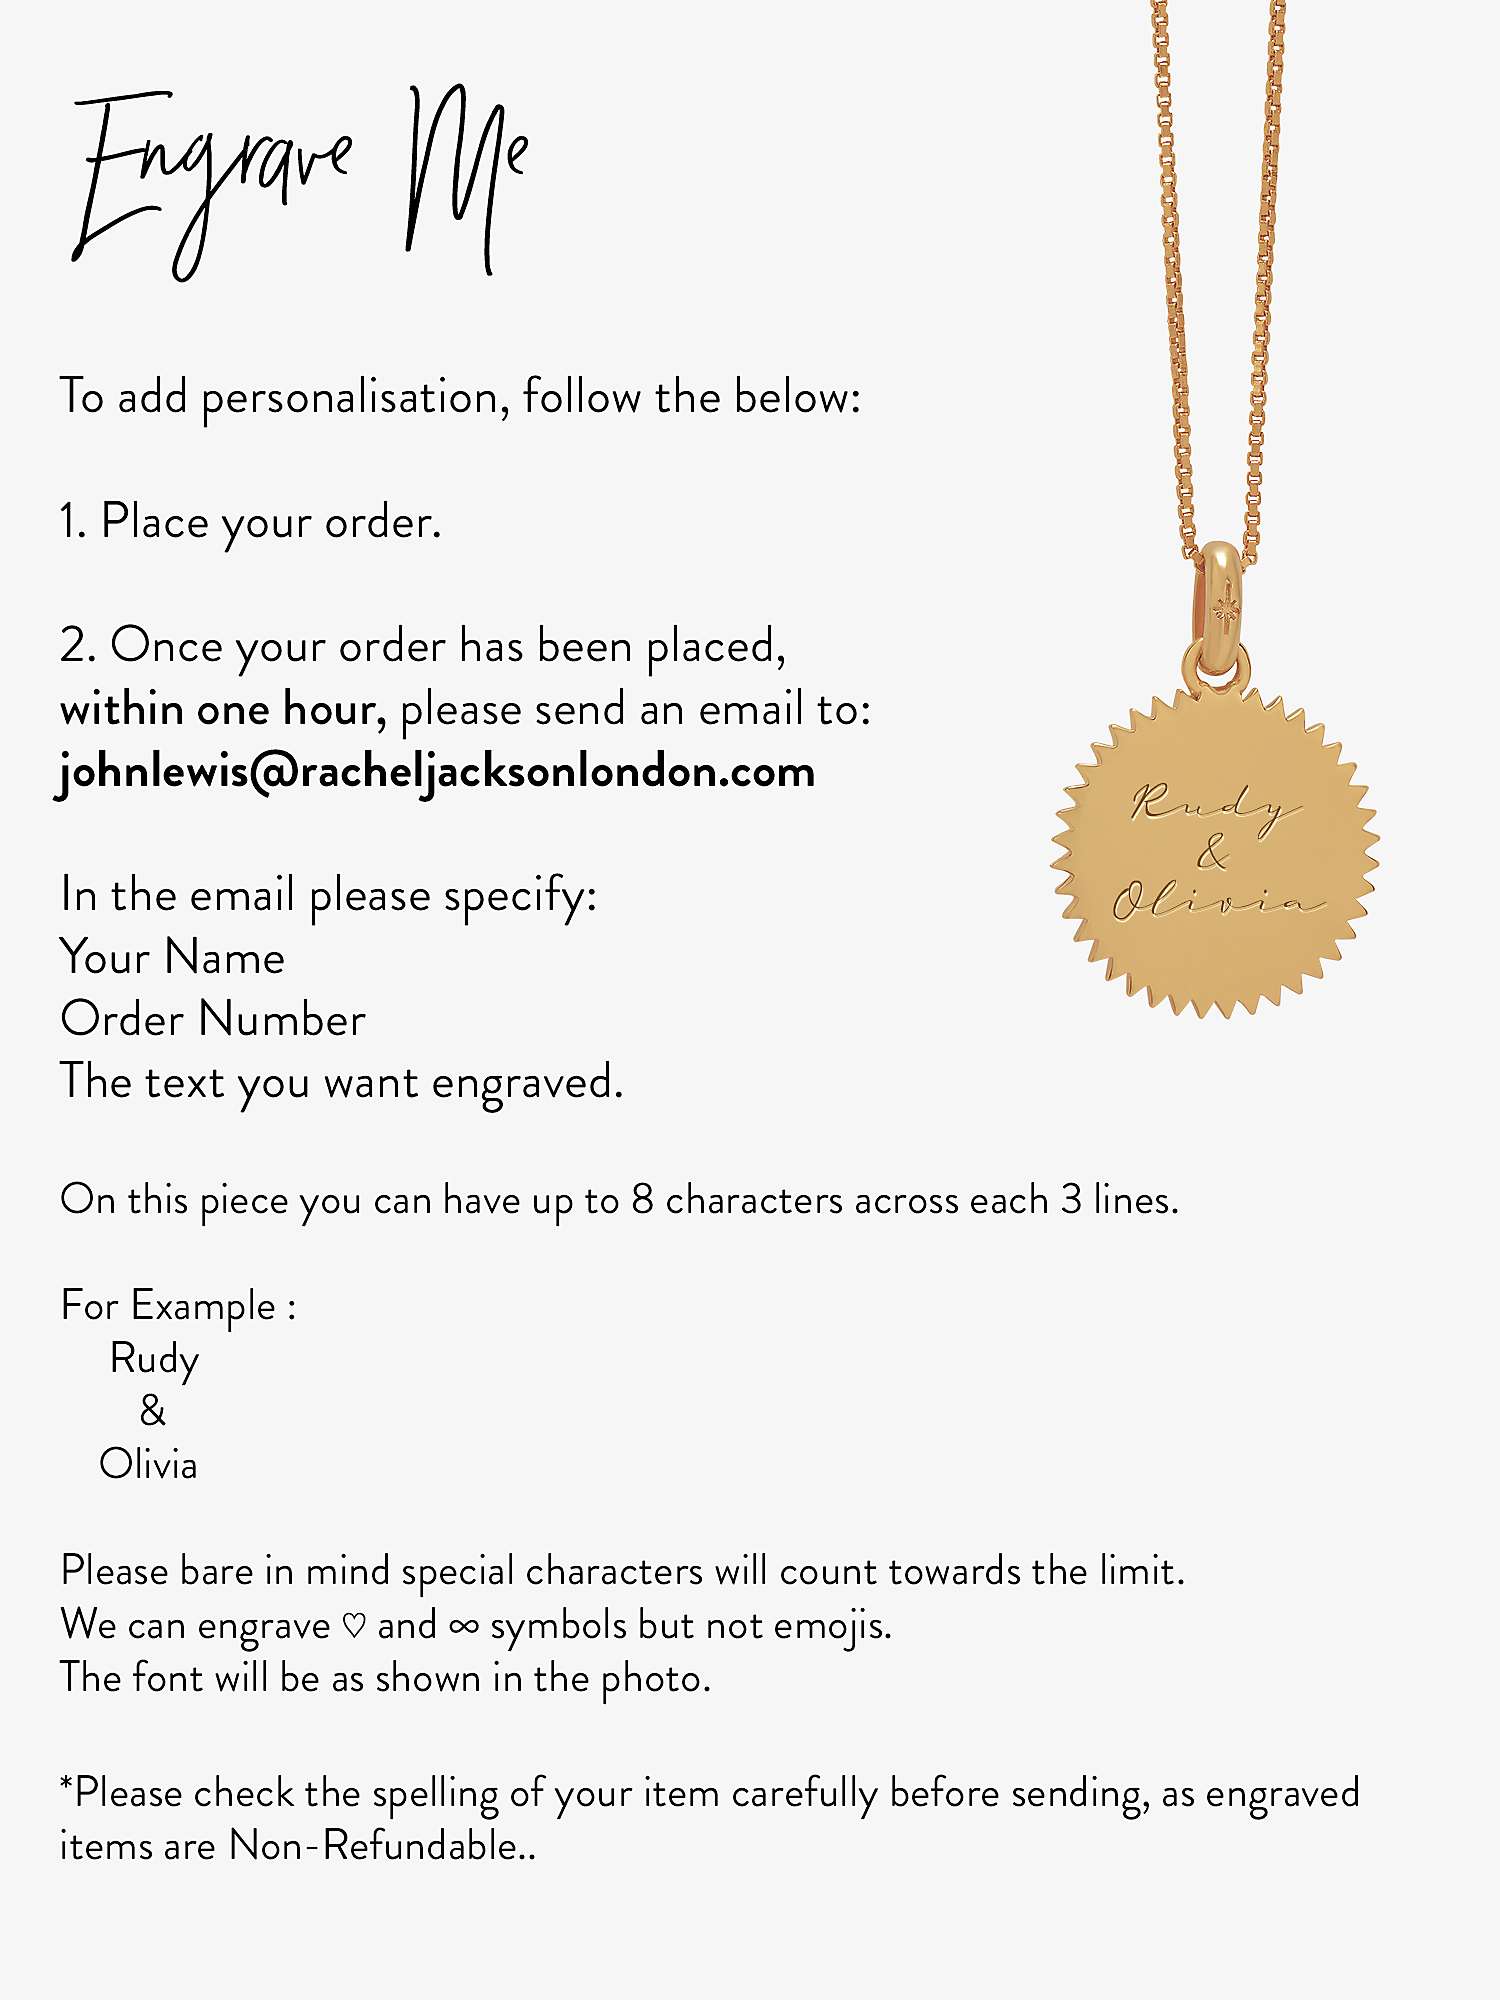 Buy Rachel Jackson London Personalised Elements Earth Art Coin Pendant Necklace, Gold Online at johnlewis.com